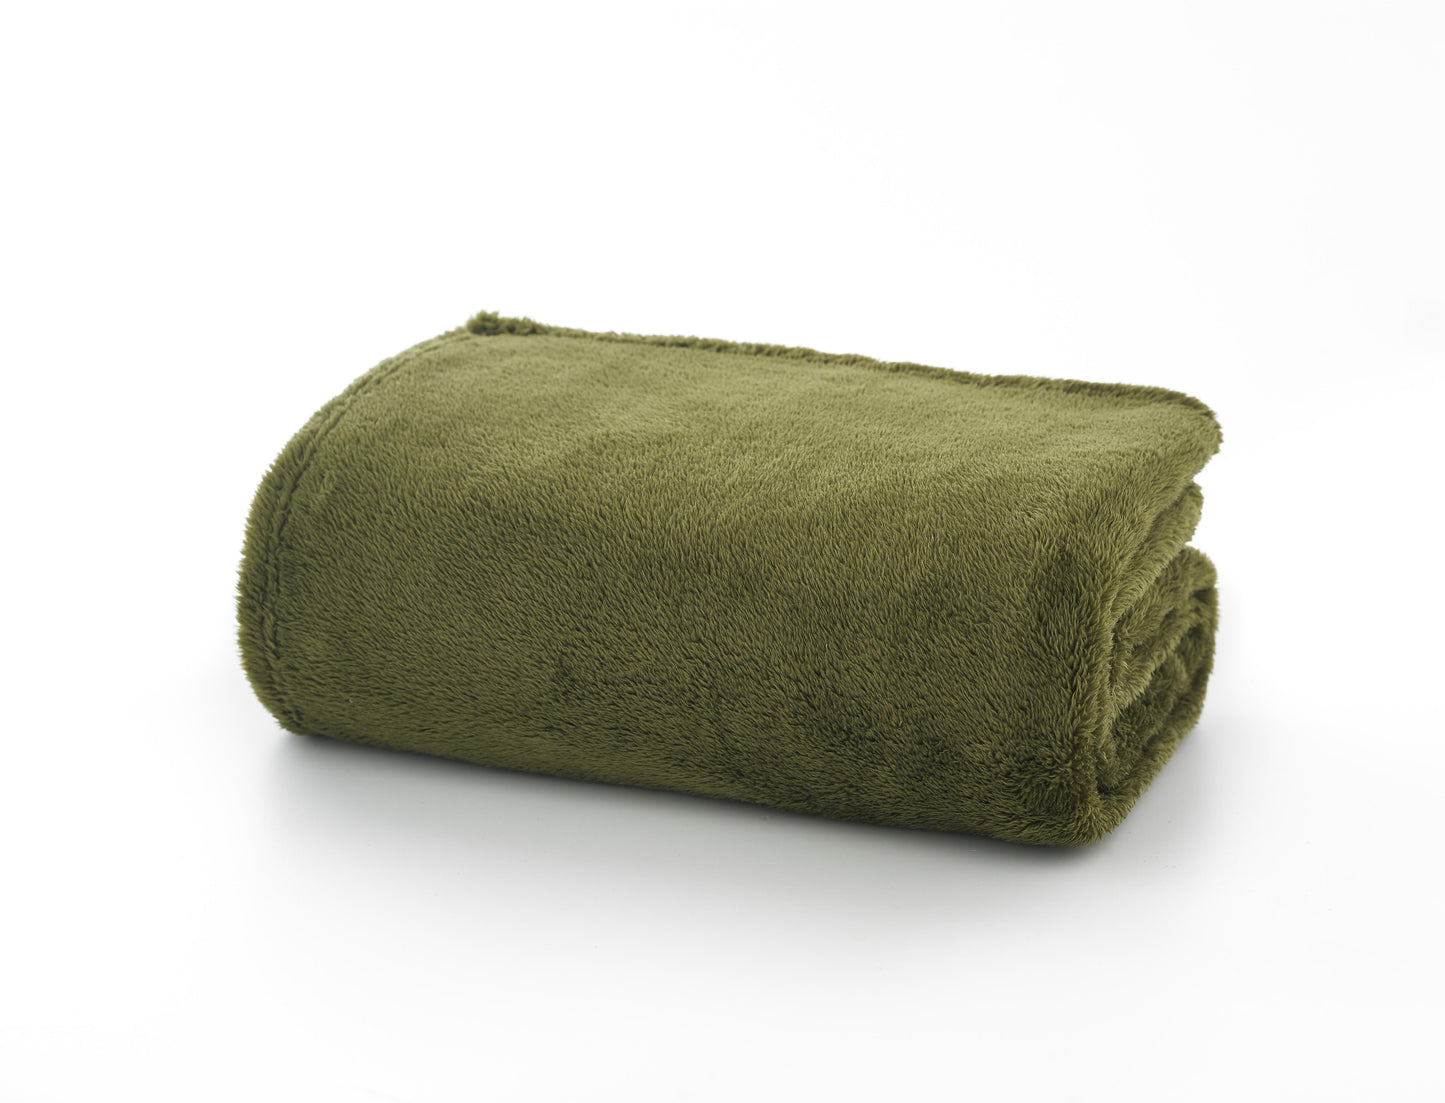 Teddy Fleece Supersoft Throw in Olive Green